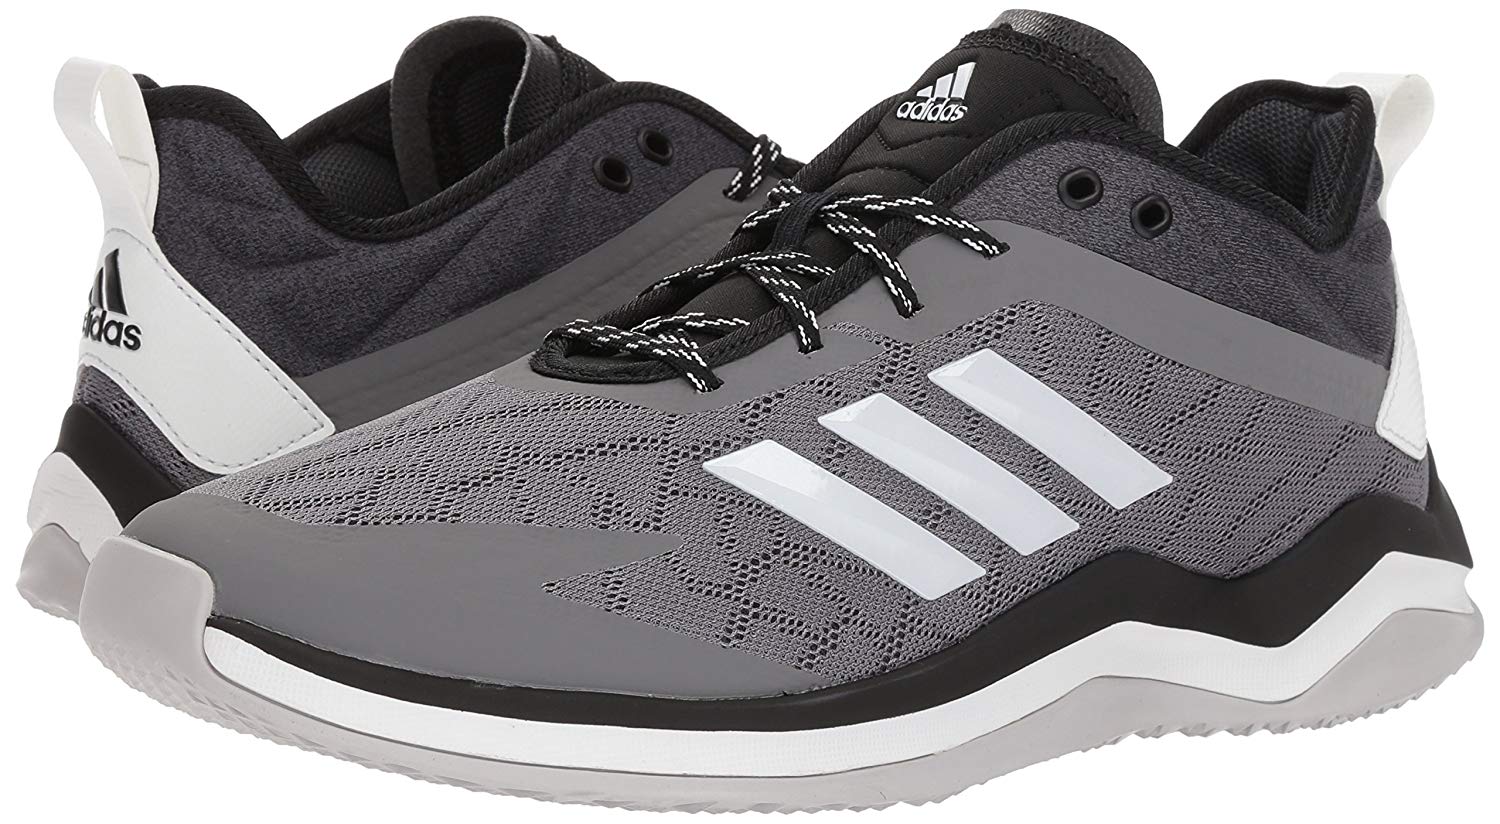 adidas speed trainer 4 shoes